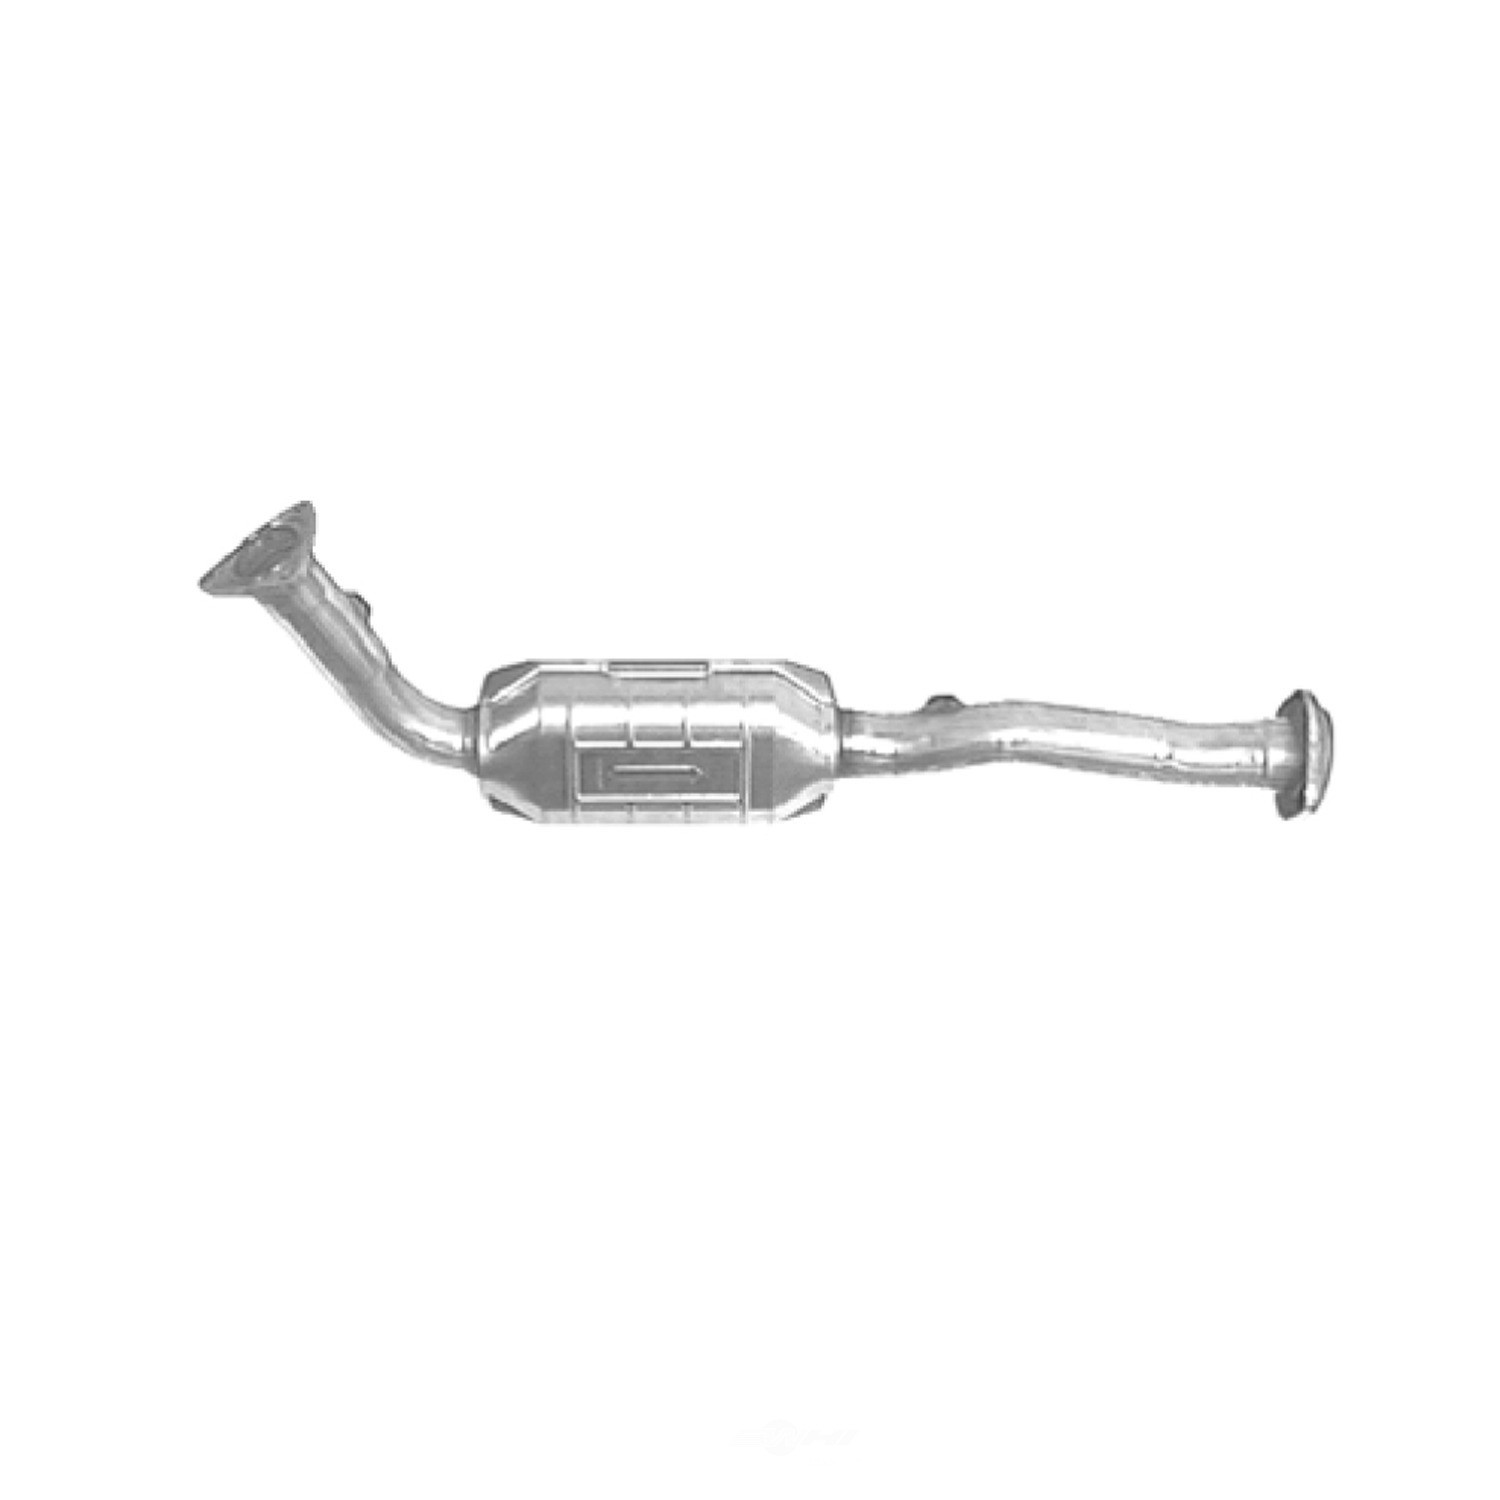 AP EXHAUST FEDERAL CONVERTER - Direct Fit Converter - APG 645429